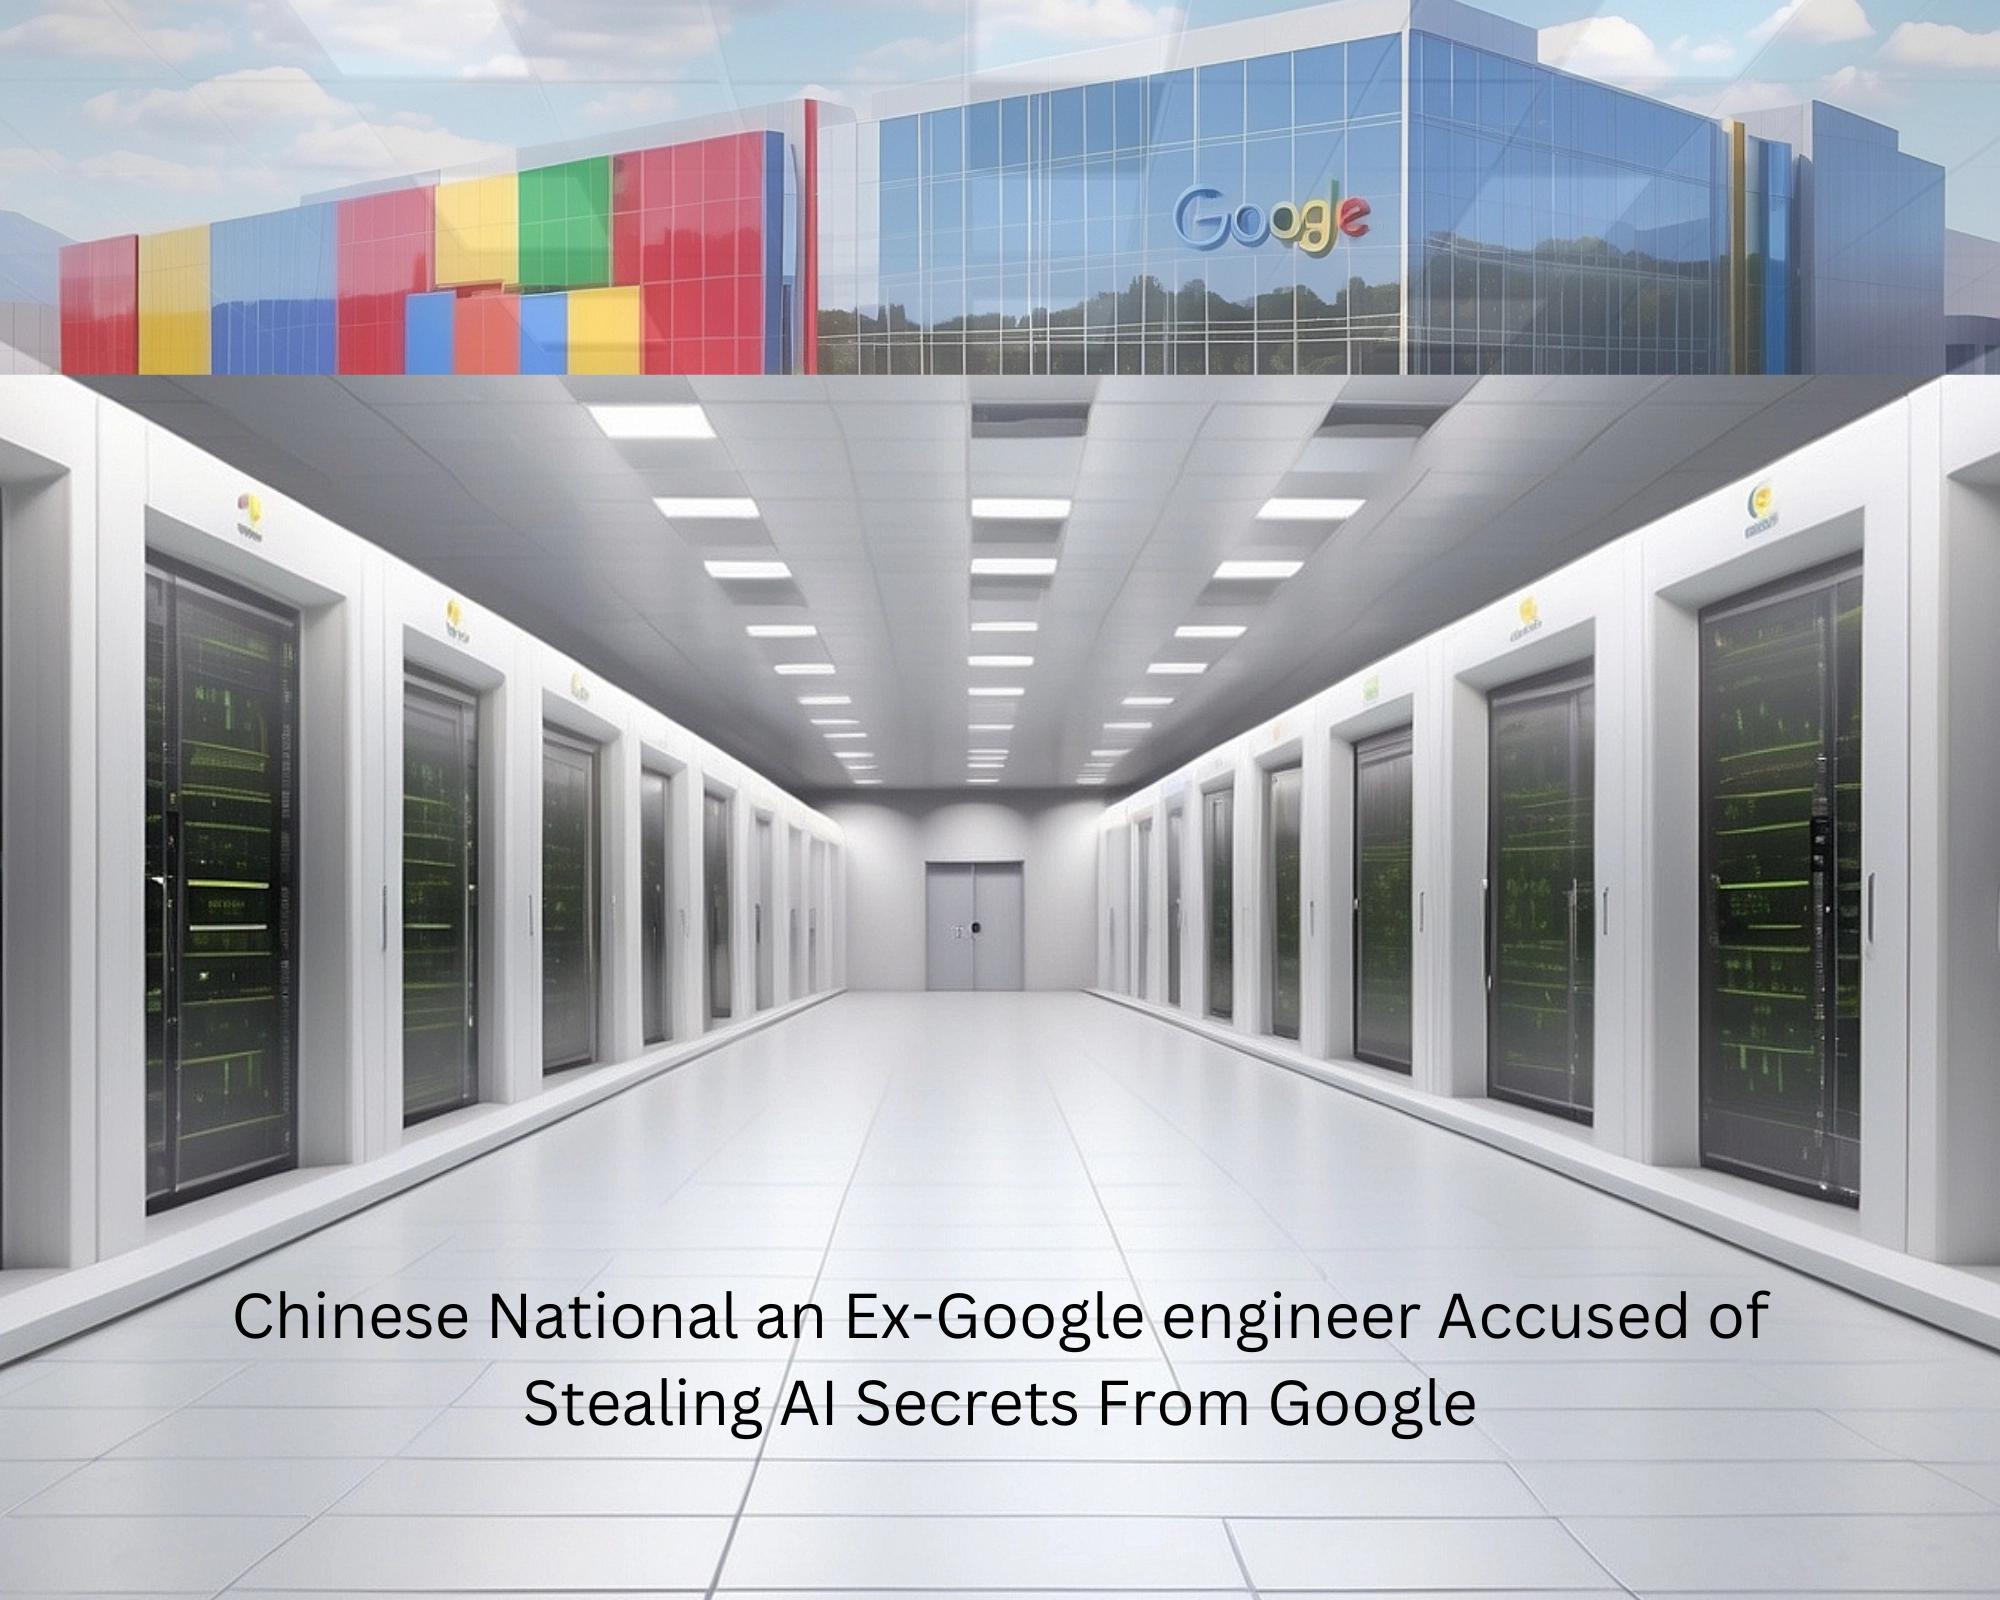 Ex-Google Engineer Busted: Downloading AI Trade Secrets for Chinese Companies? [Video]